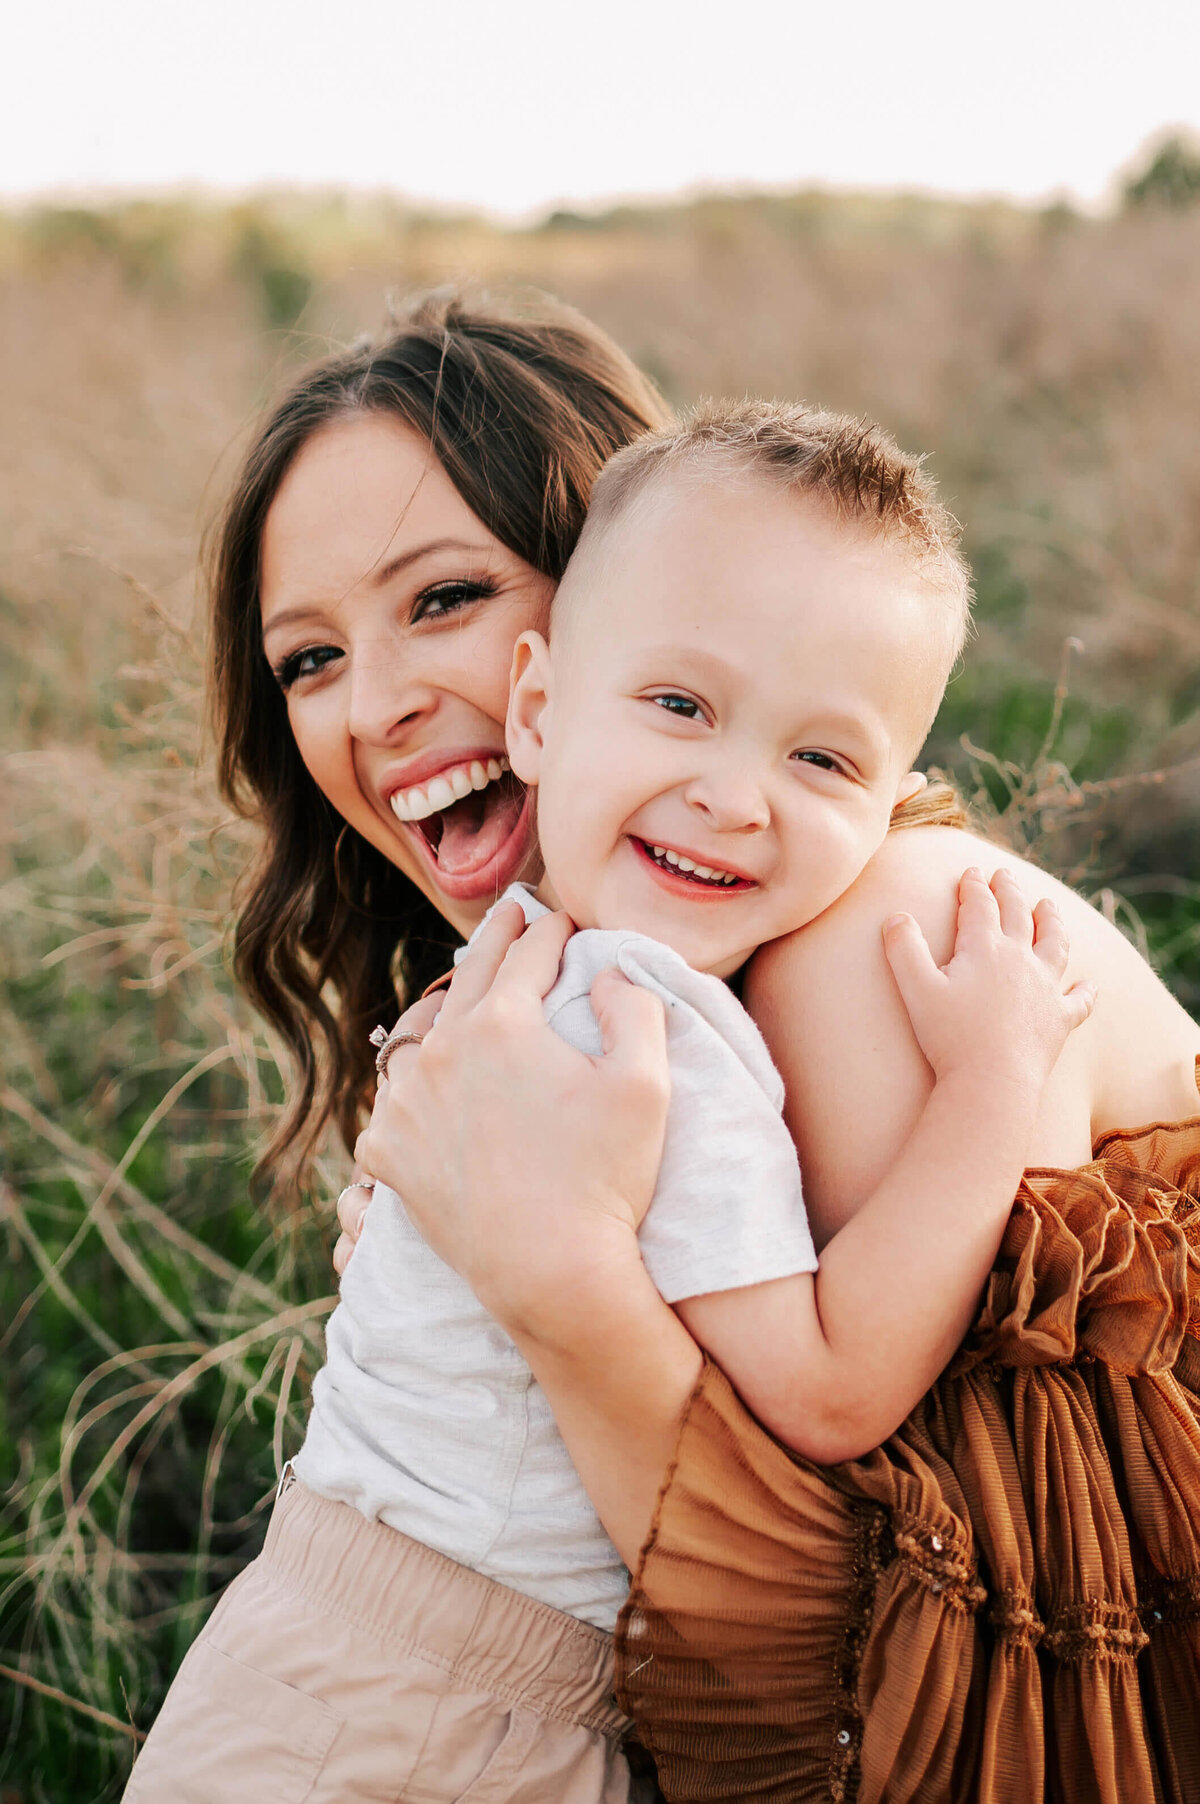 Springfield MO family photographer Jessica Kennedy of The XO Photography captures mom and son hugging in field